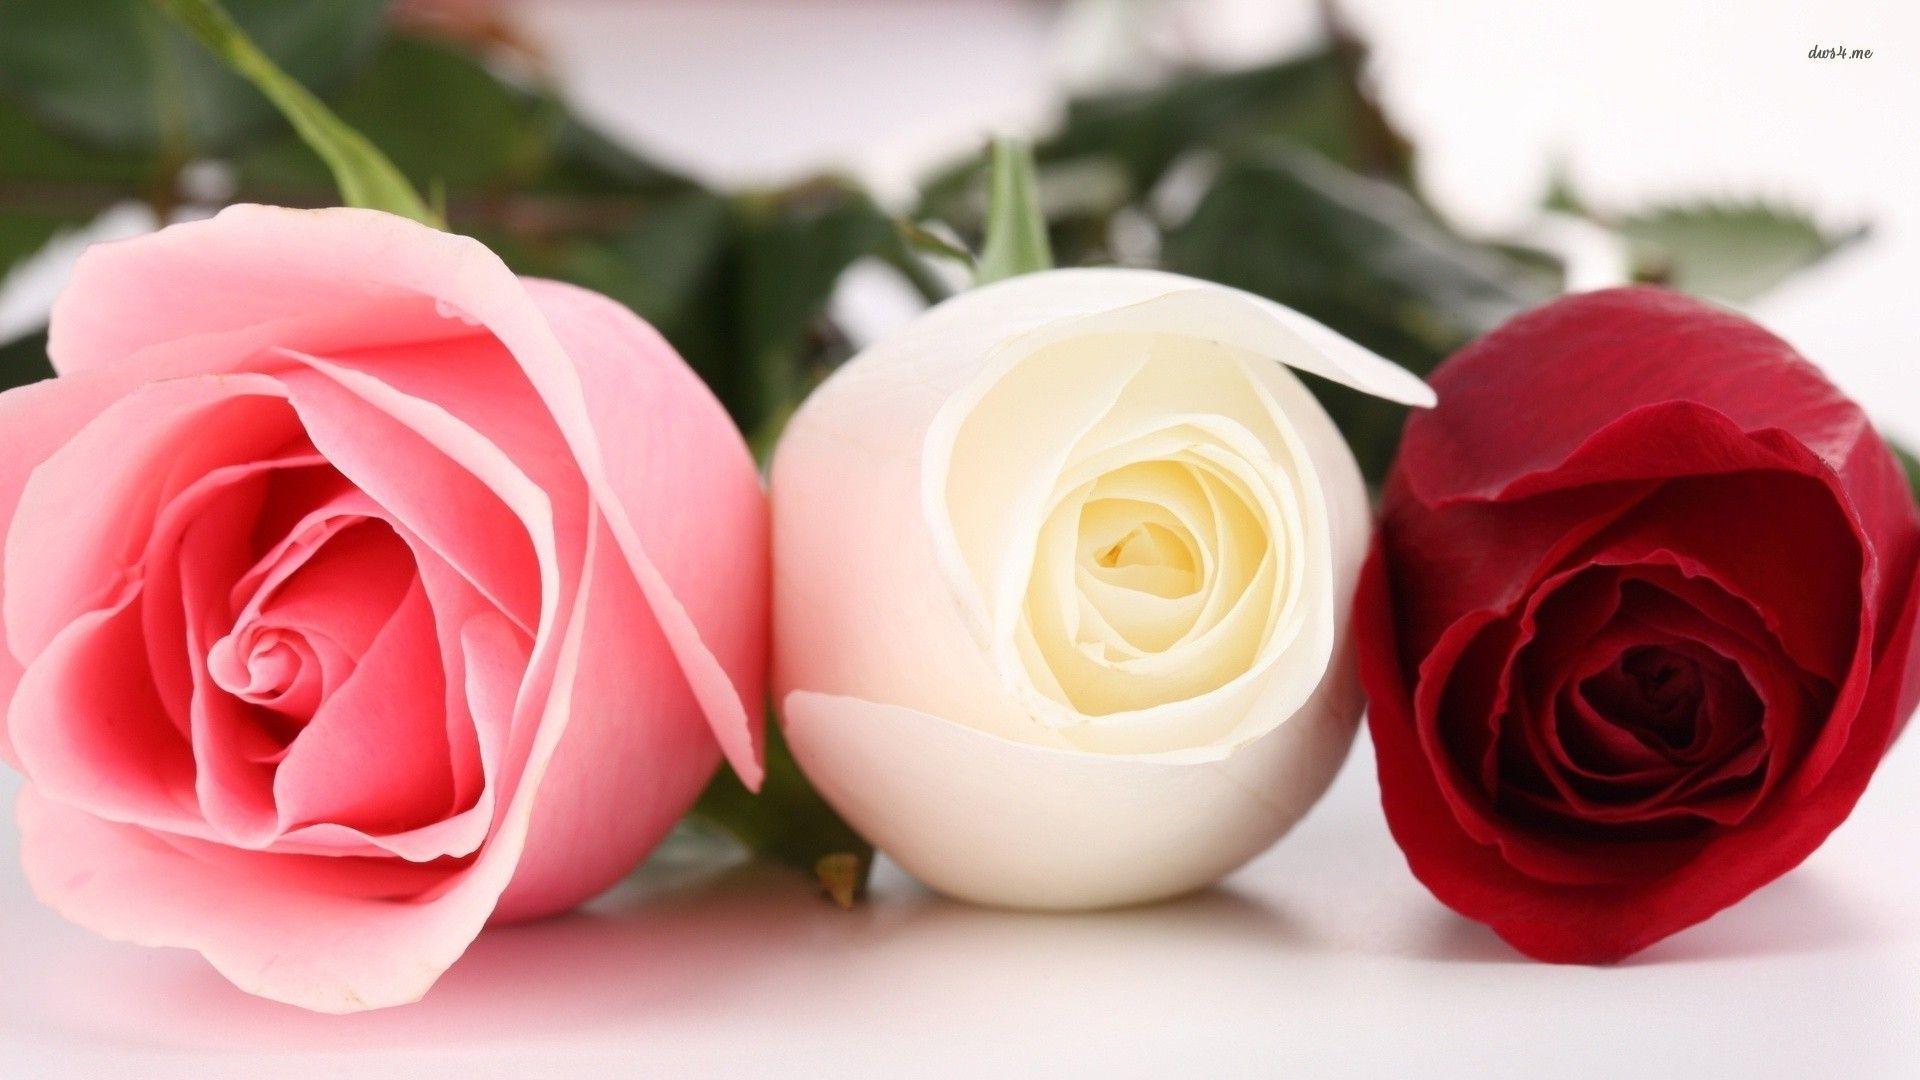 Pink, white and red roses wallpaper wallpaper